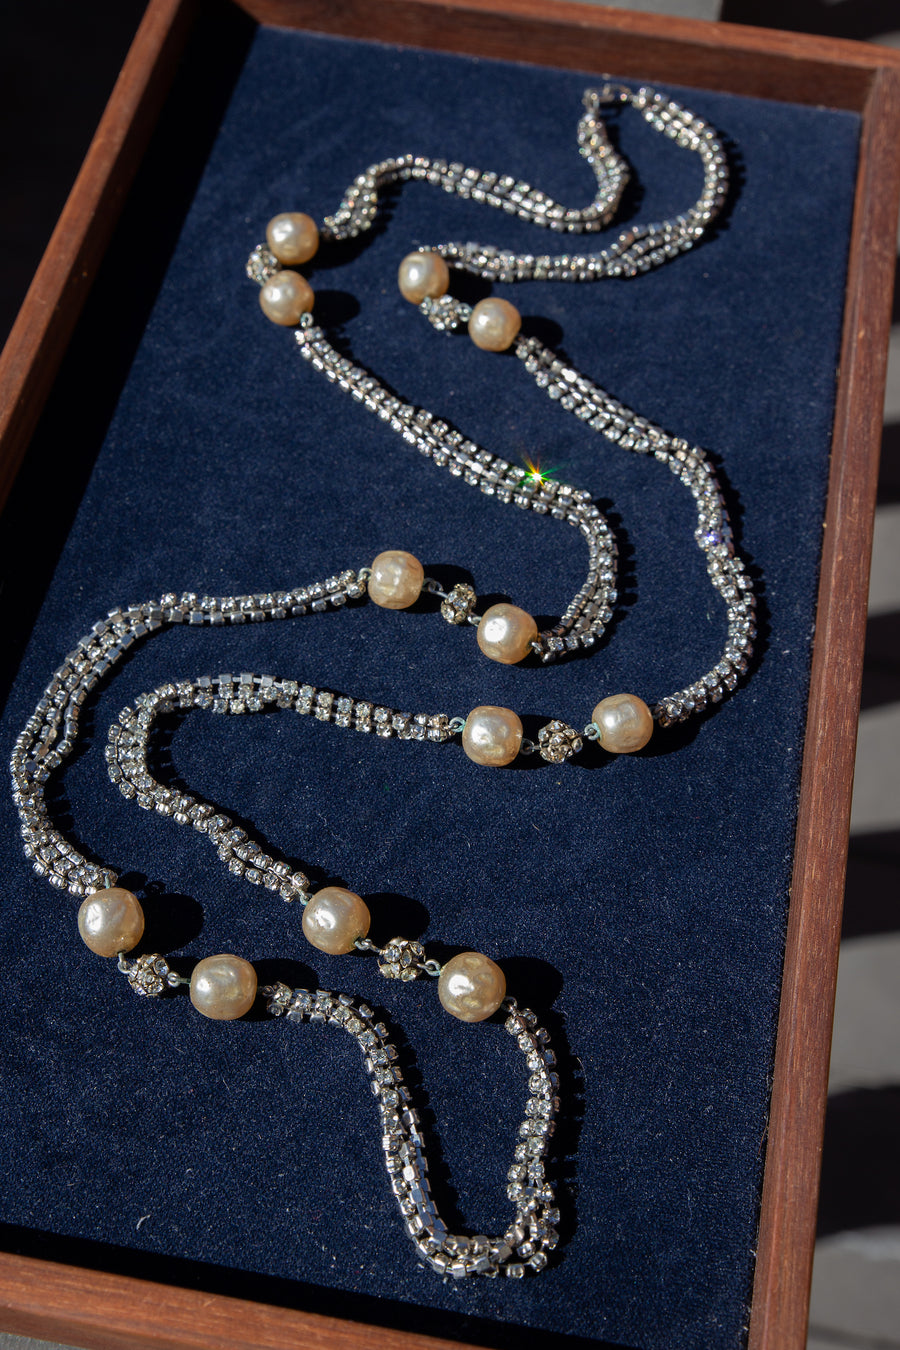 Rhinestone and Faux Aged Pearl Extra Long Necklace